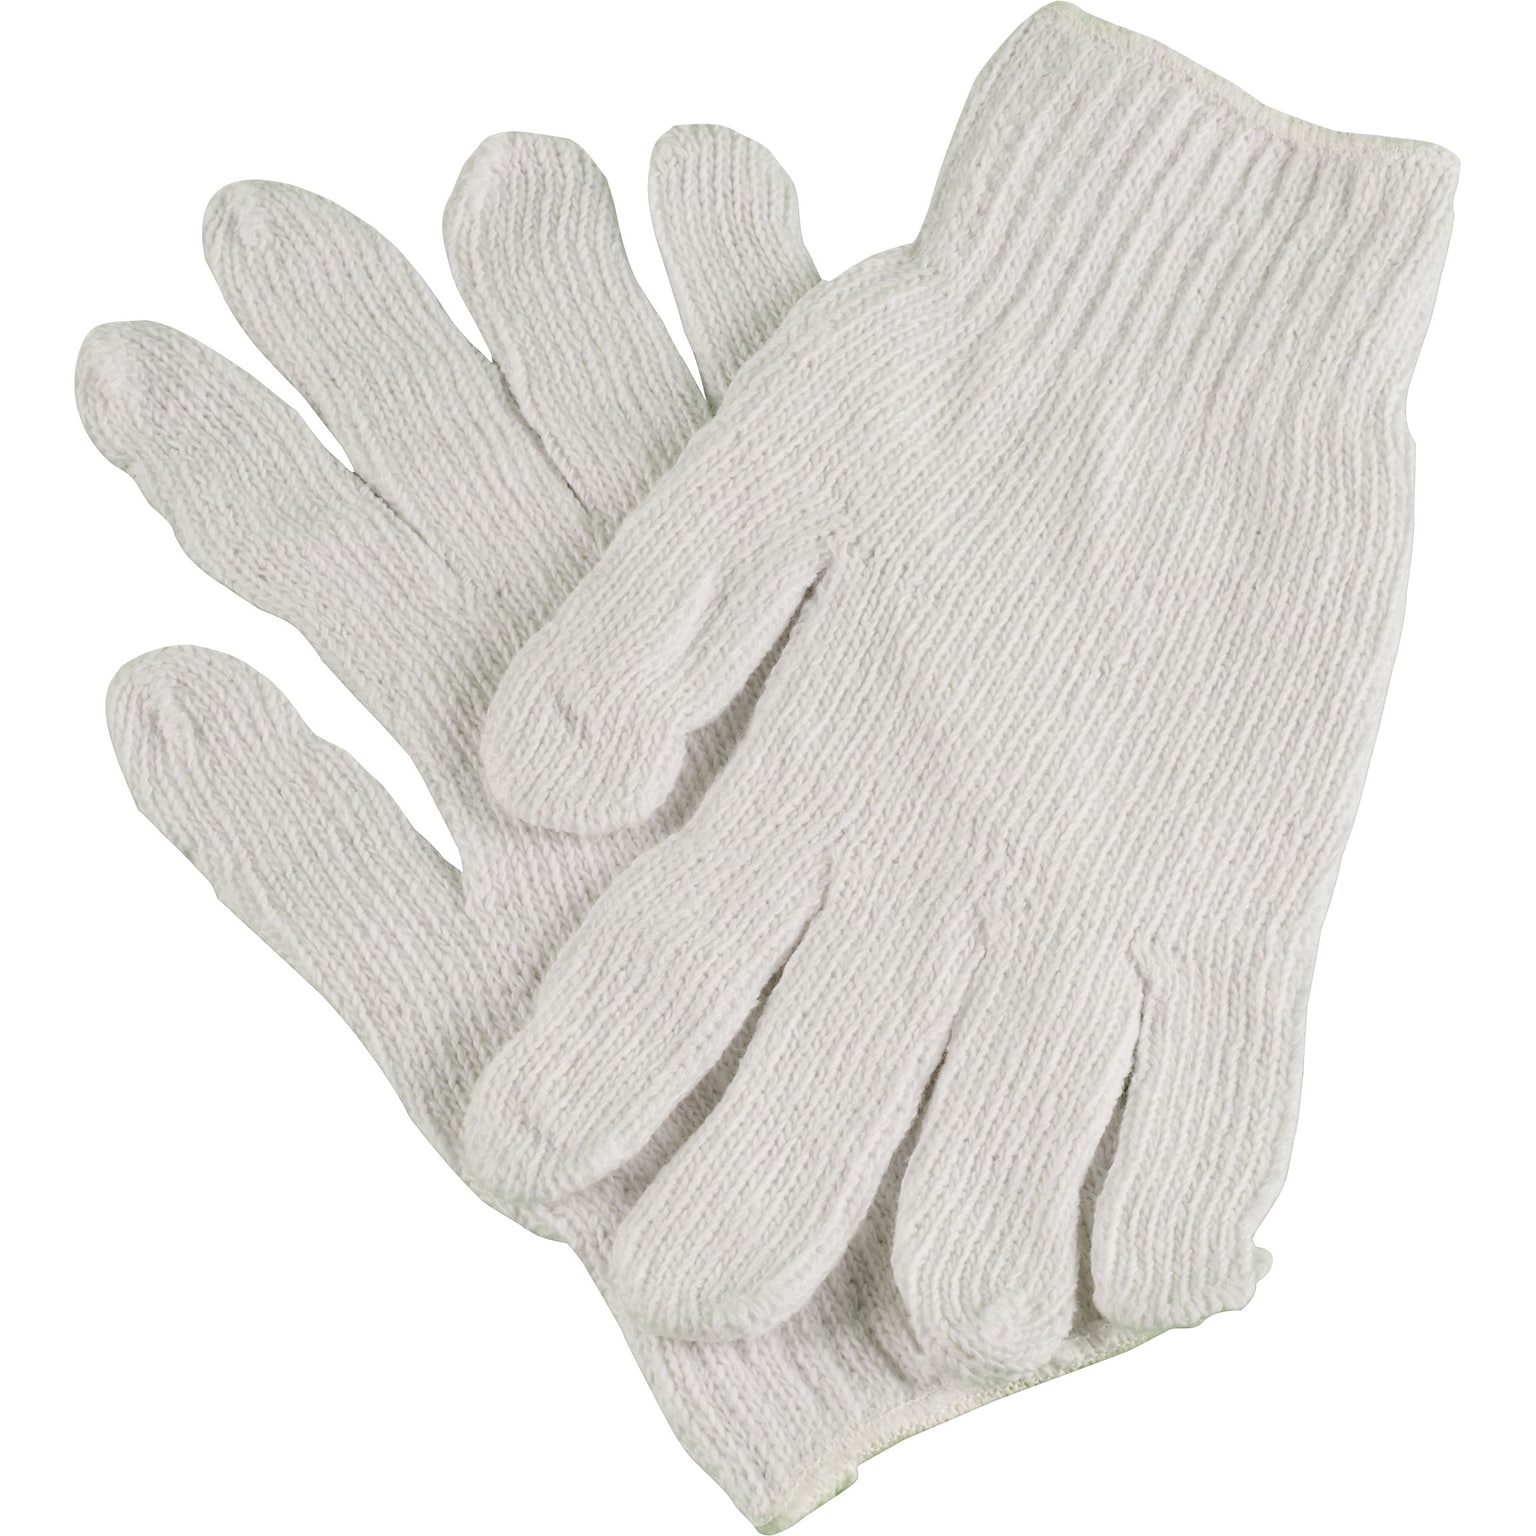 Ambitex Work Gloves Cotton Polyester Blend, Small, White, 12/Bag (CTPS400SM/NLW)